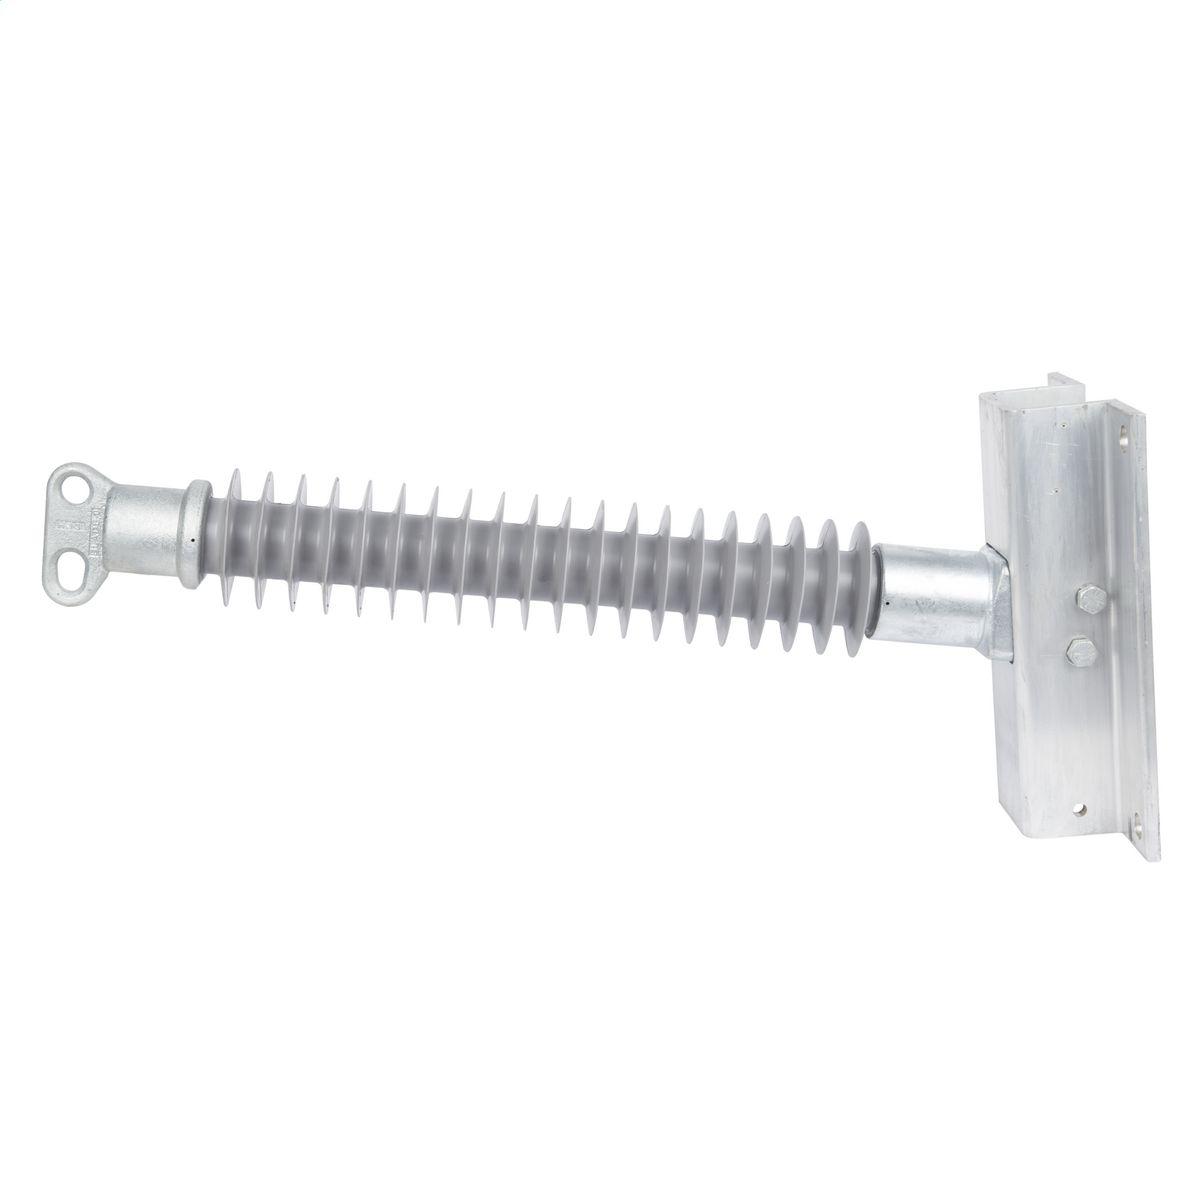 Hubbell P350142S0030 3.5" Line Post, 2 hole blade,Aluminum  flat base 9x13 - 7/8" bolts  ; Made from hydrophobic silicone polymer ; 